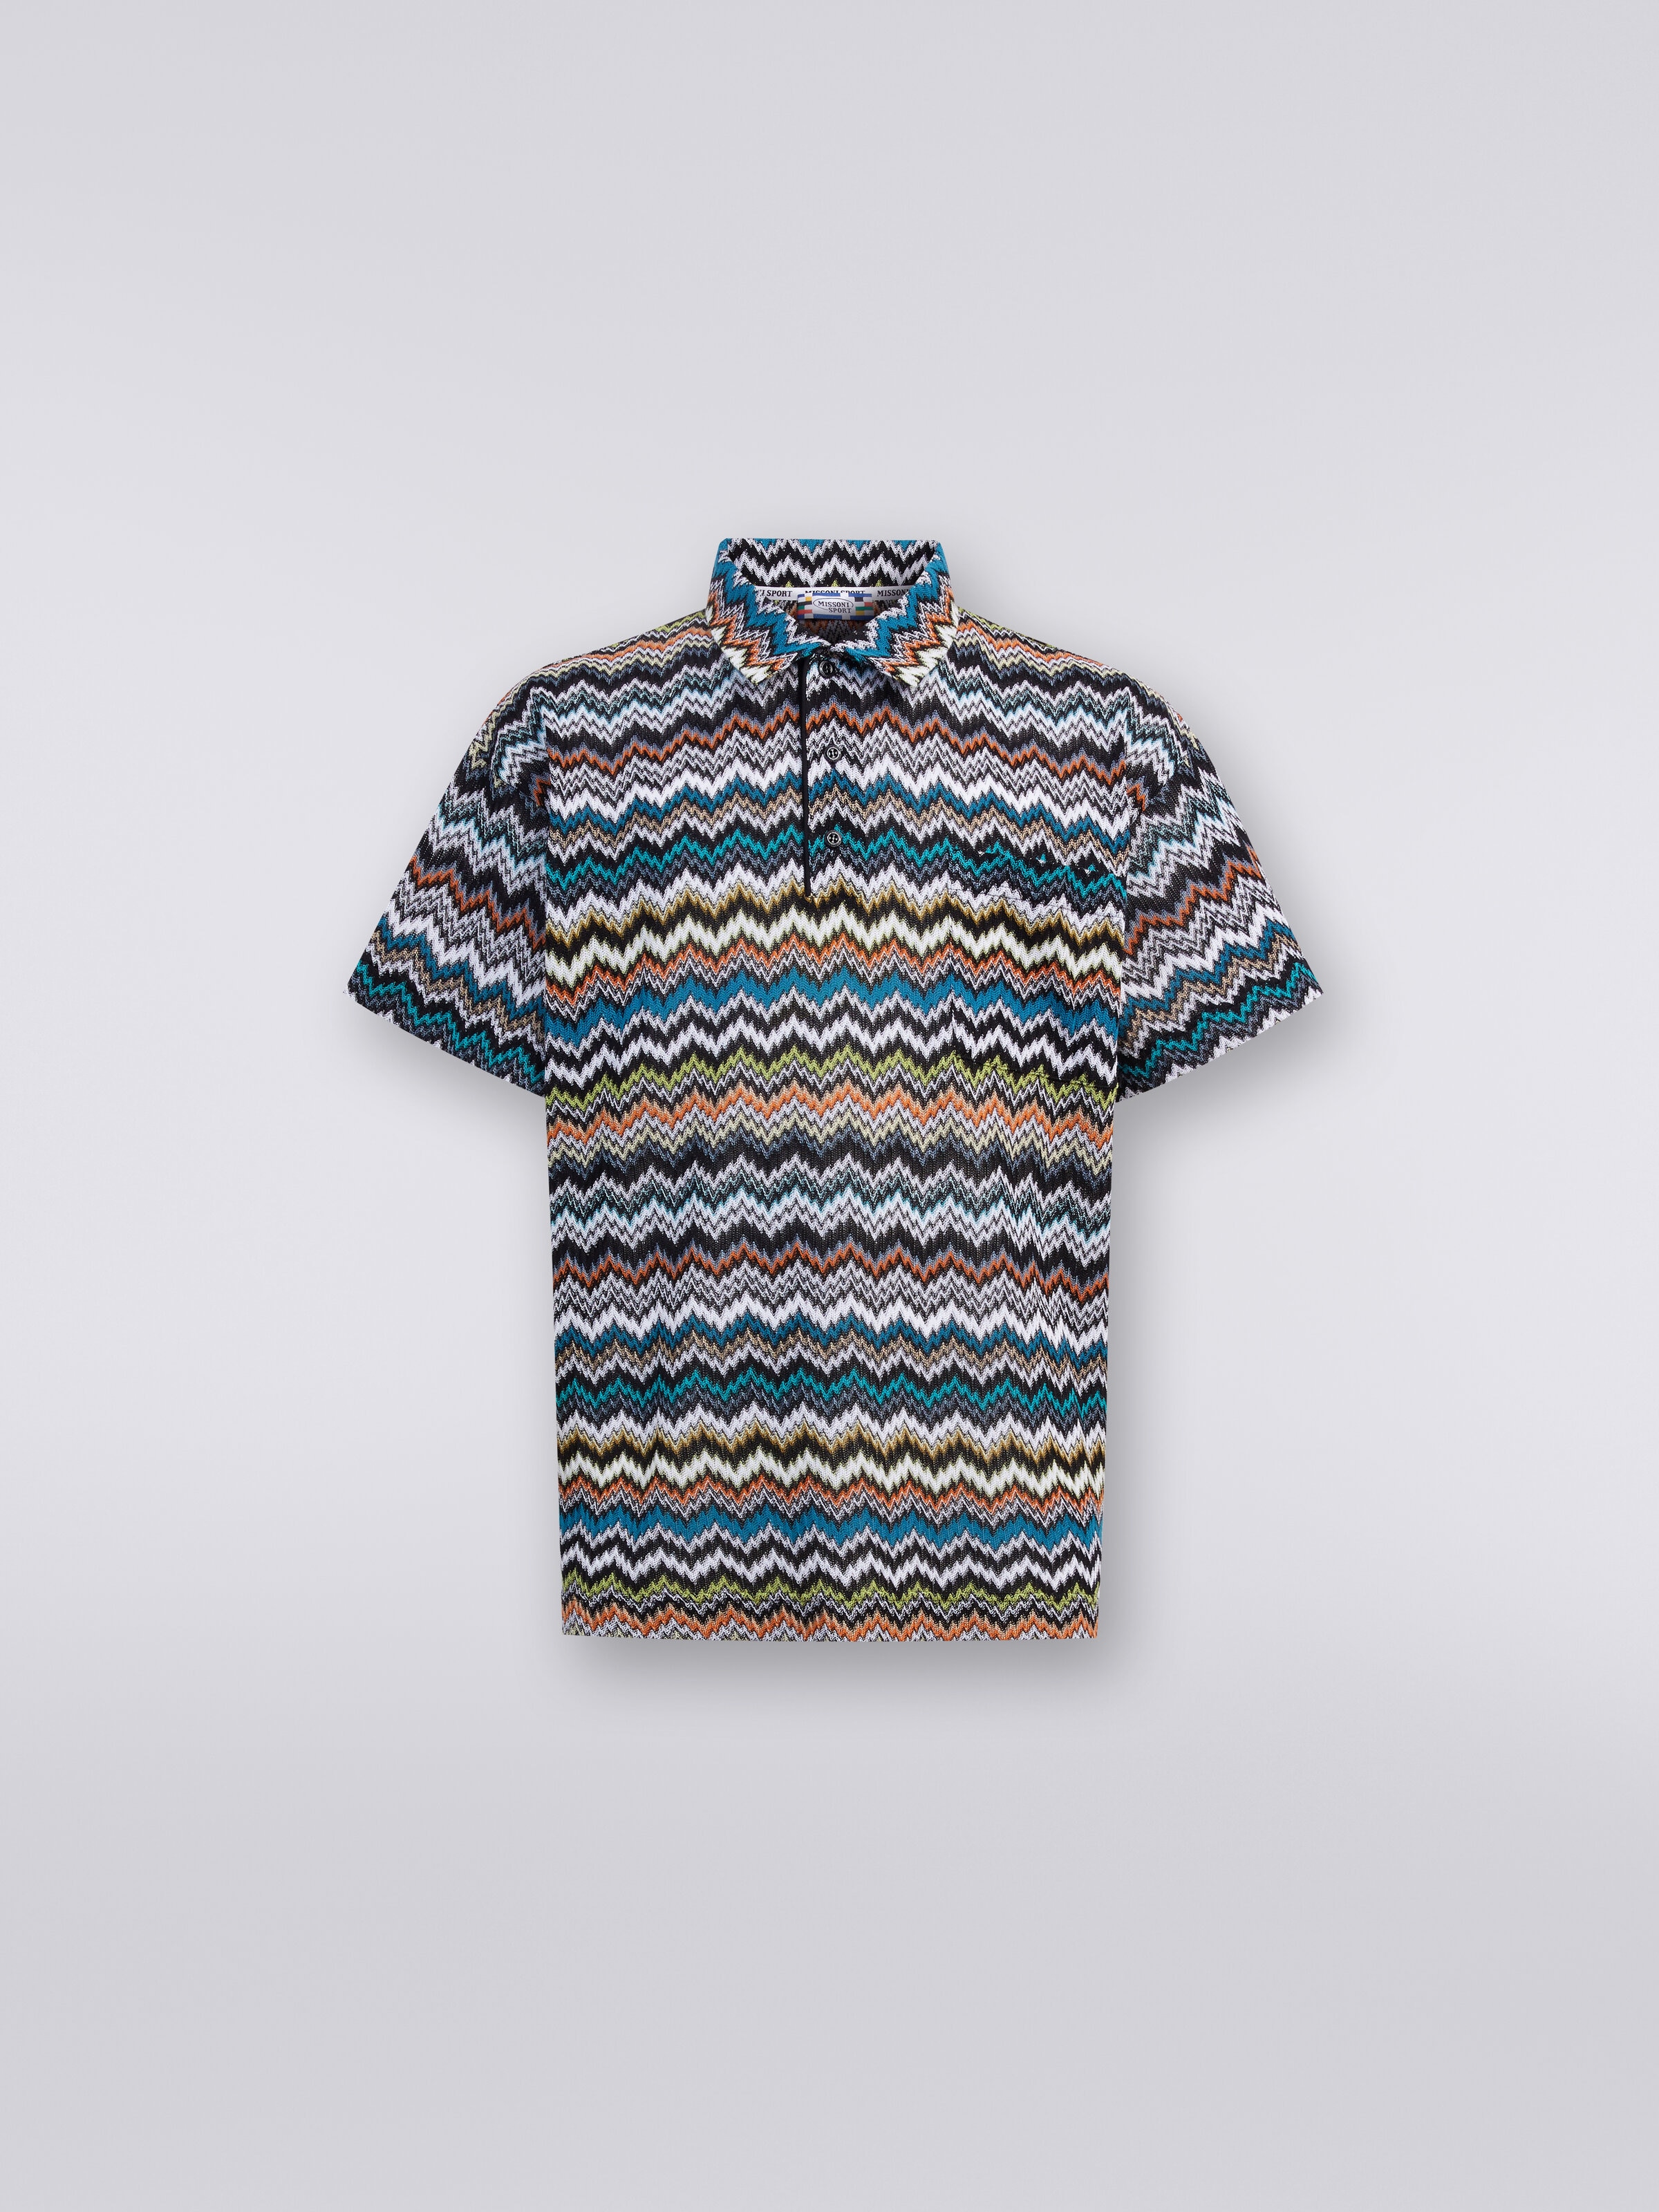 Polo shirt in zigzag cotton and viscose knit, Multicoloured  - 0